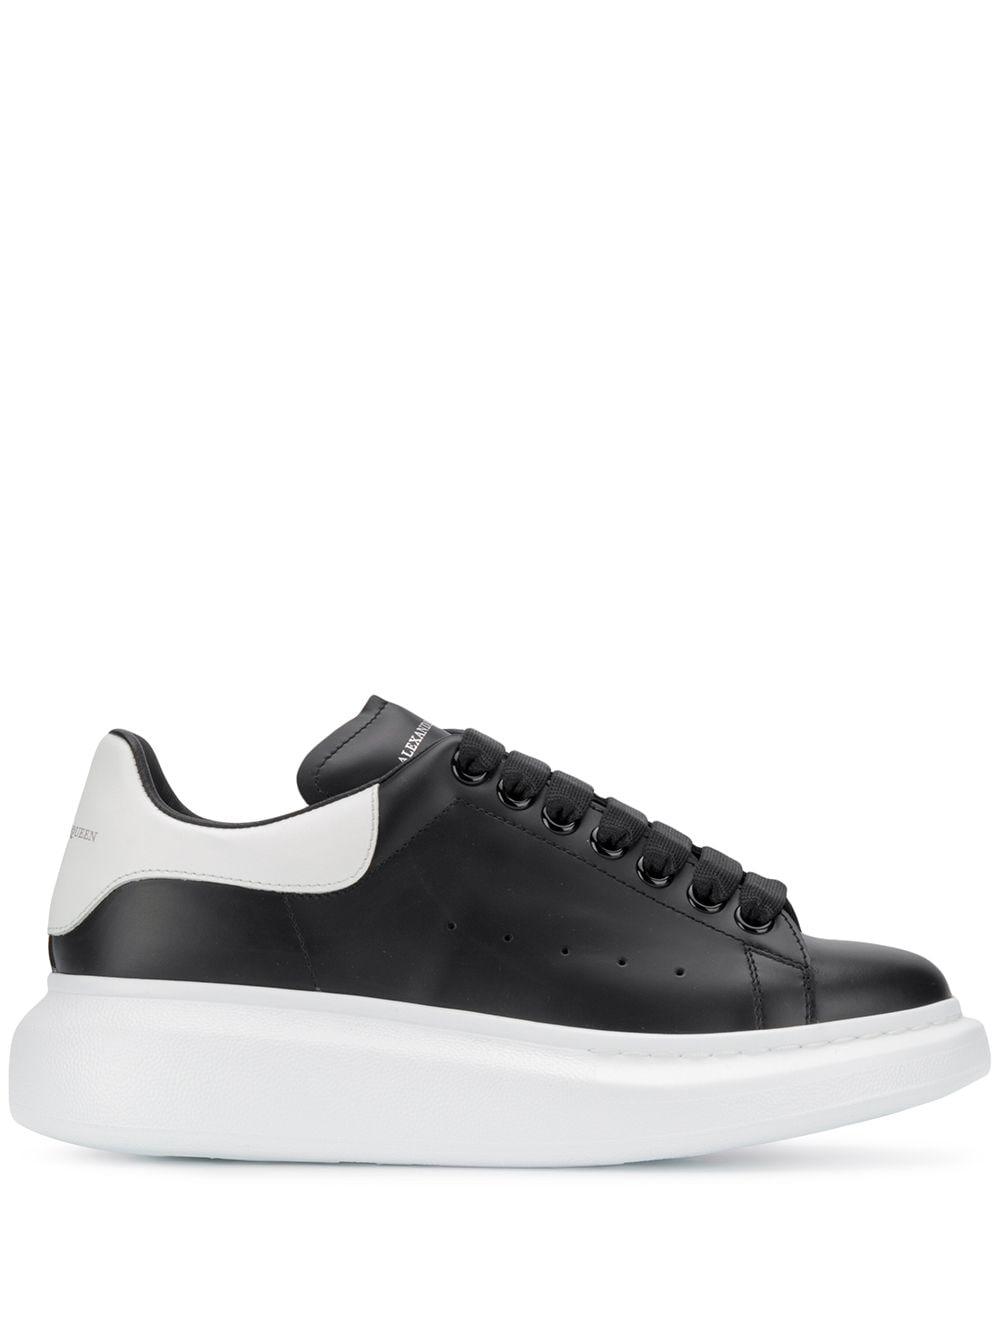 Alexander McQueen Mens Black And White Show Leather Platform Trainers ...